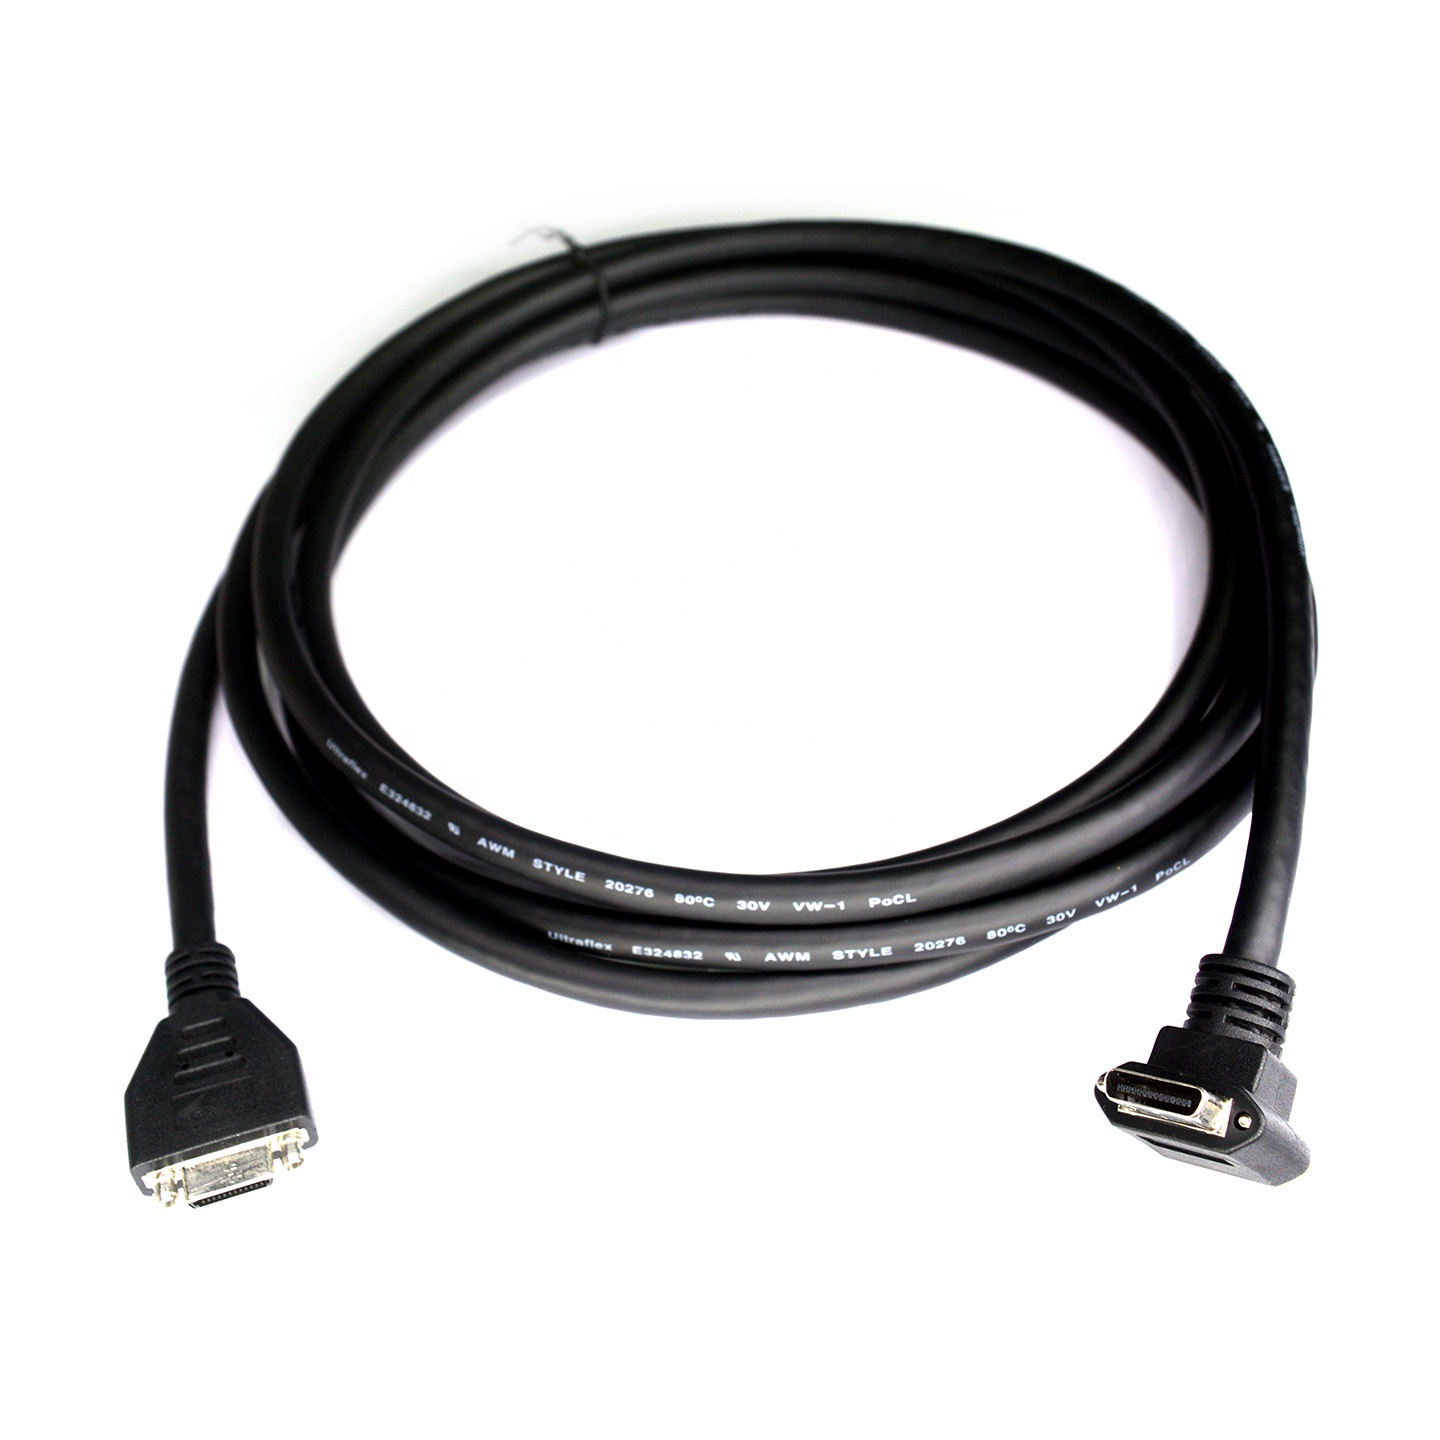 Camera Link SDR right angled male to SDR female high flexible with locking screws extension cables for industrial cameras